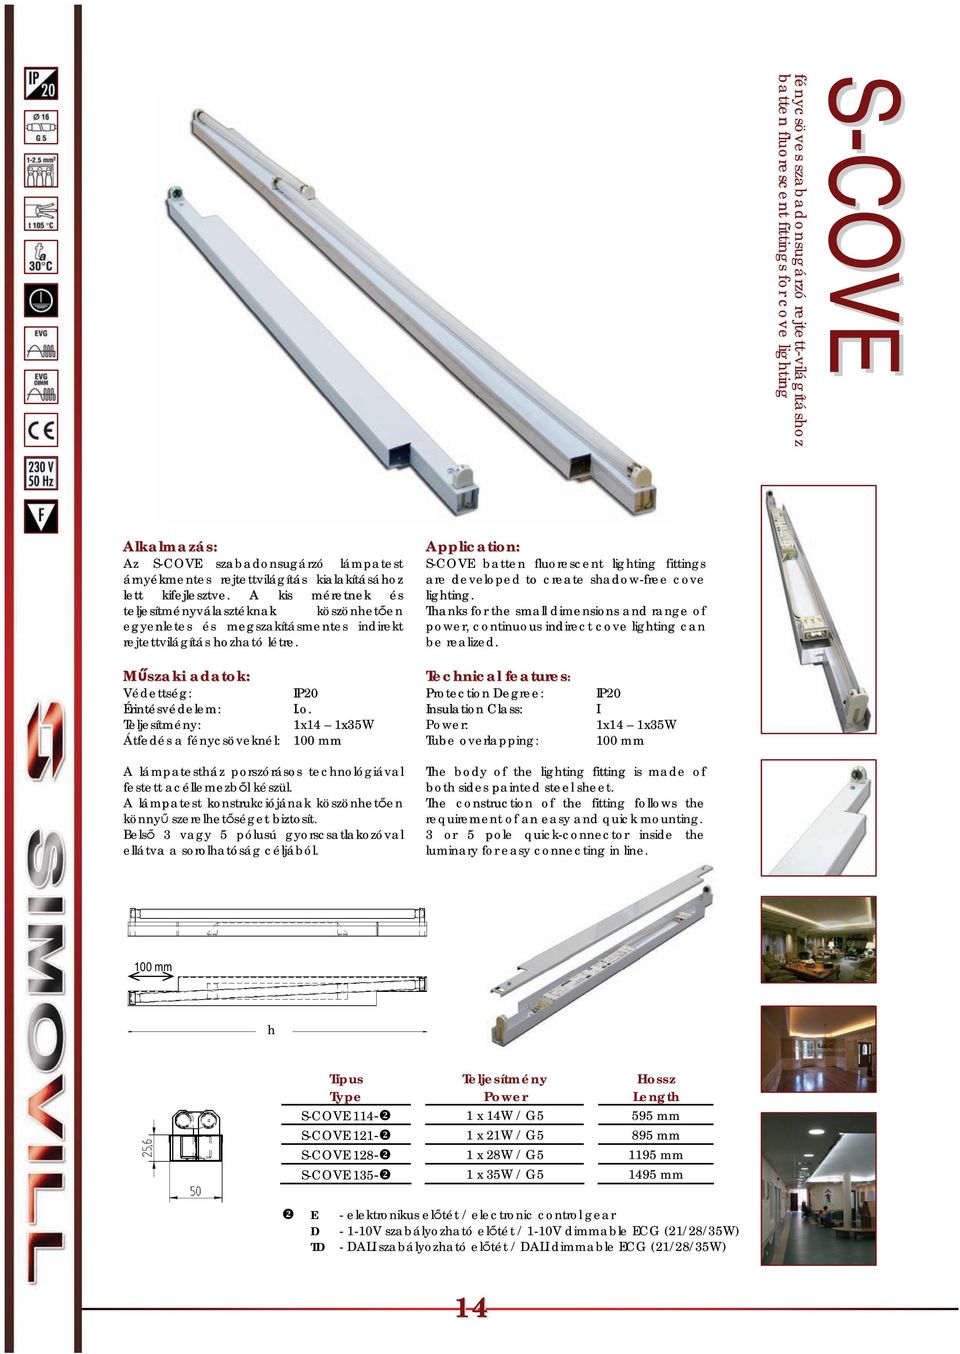 S-COVE batten fluorescent lighting fittings are developed to create shadow-free cove lighting. Thanks for the small dimensions and range of power, continuous indirect cove lighting can be realized.